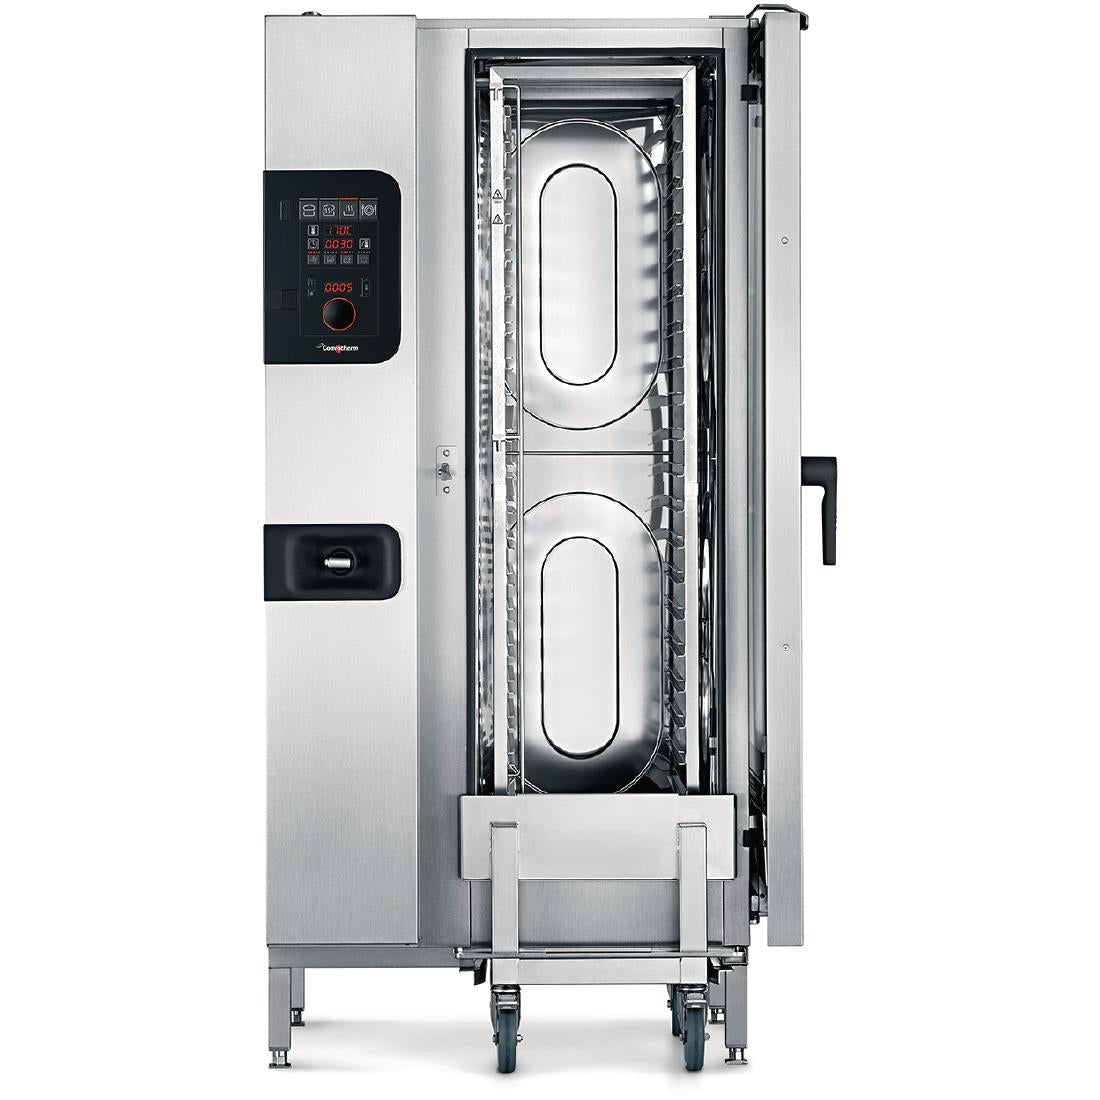 DR444-MO Convotherm 4 easyDial Combi Oven 20 x 1 x1 GN Grid JD Catering Equipment Solutions Ltd